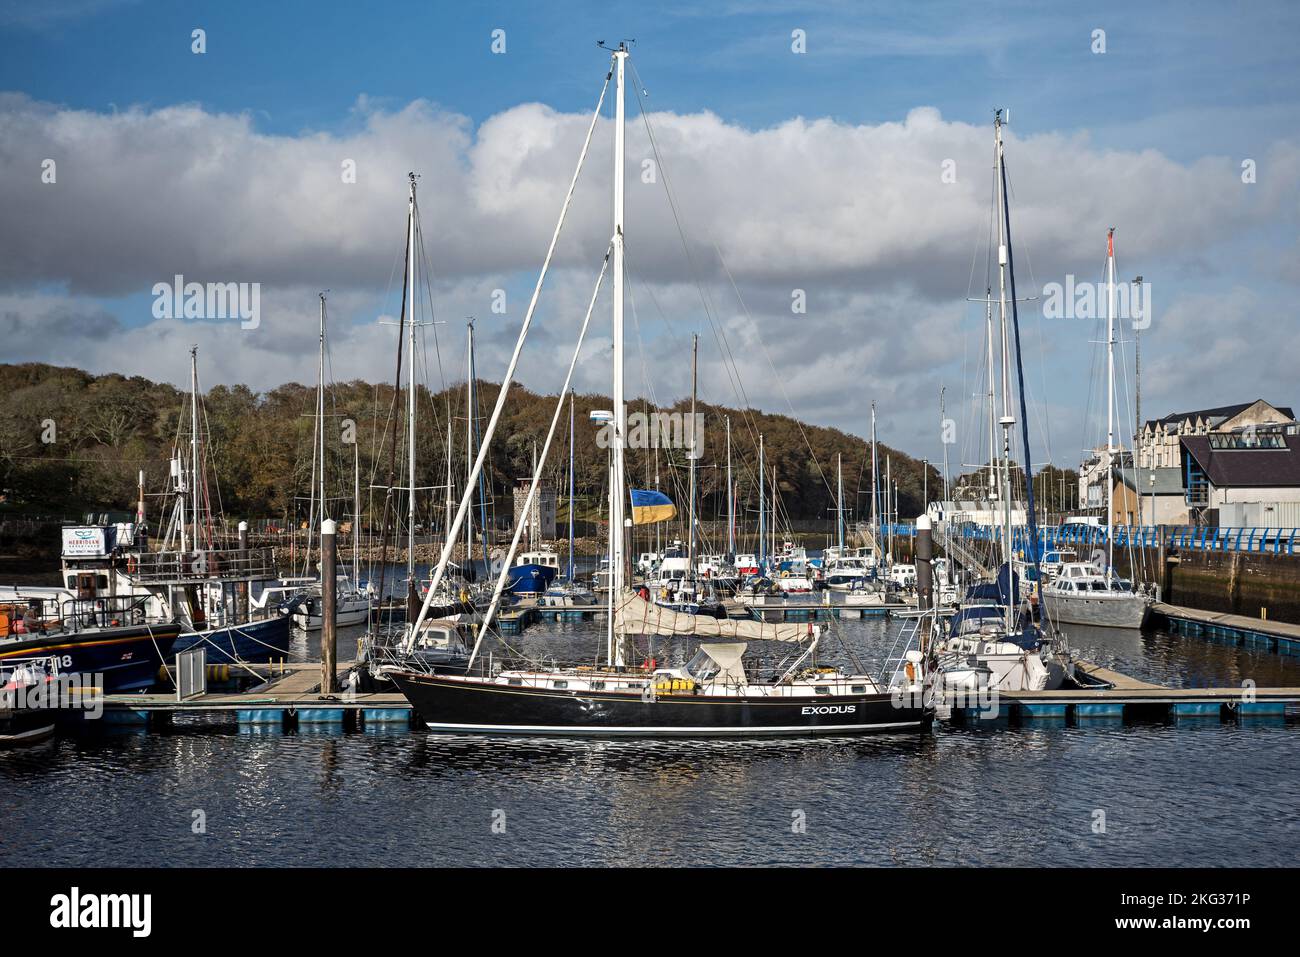 Sailing boats and pleasure craft moored in Stornoway Harbour, Isle of Lewis, Outer Hebrides, Scotland, UK. Stock Photo